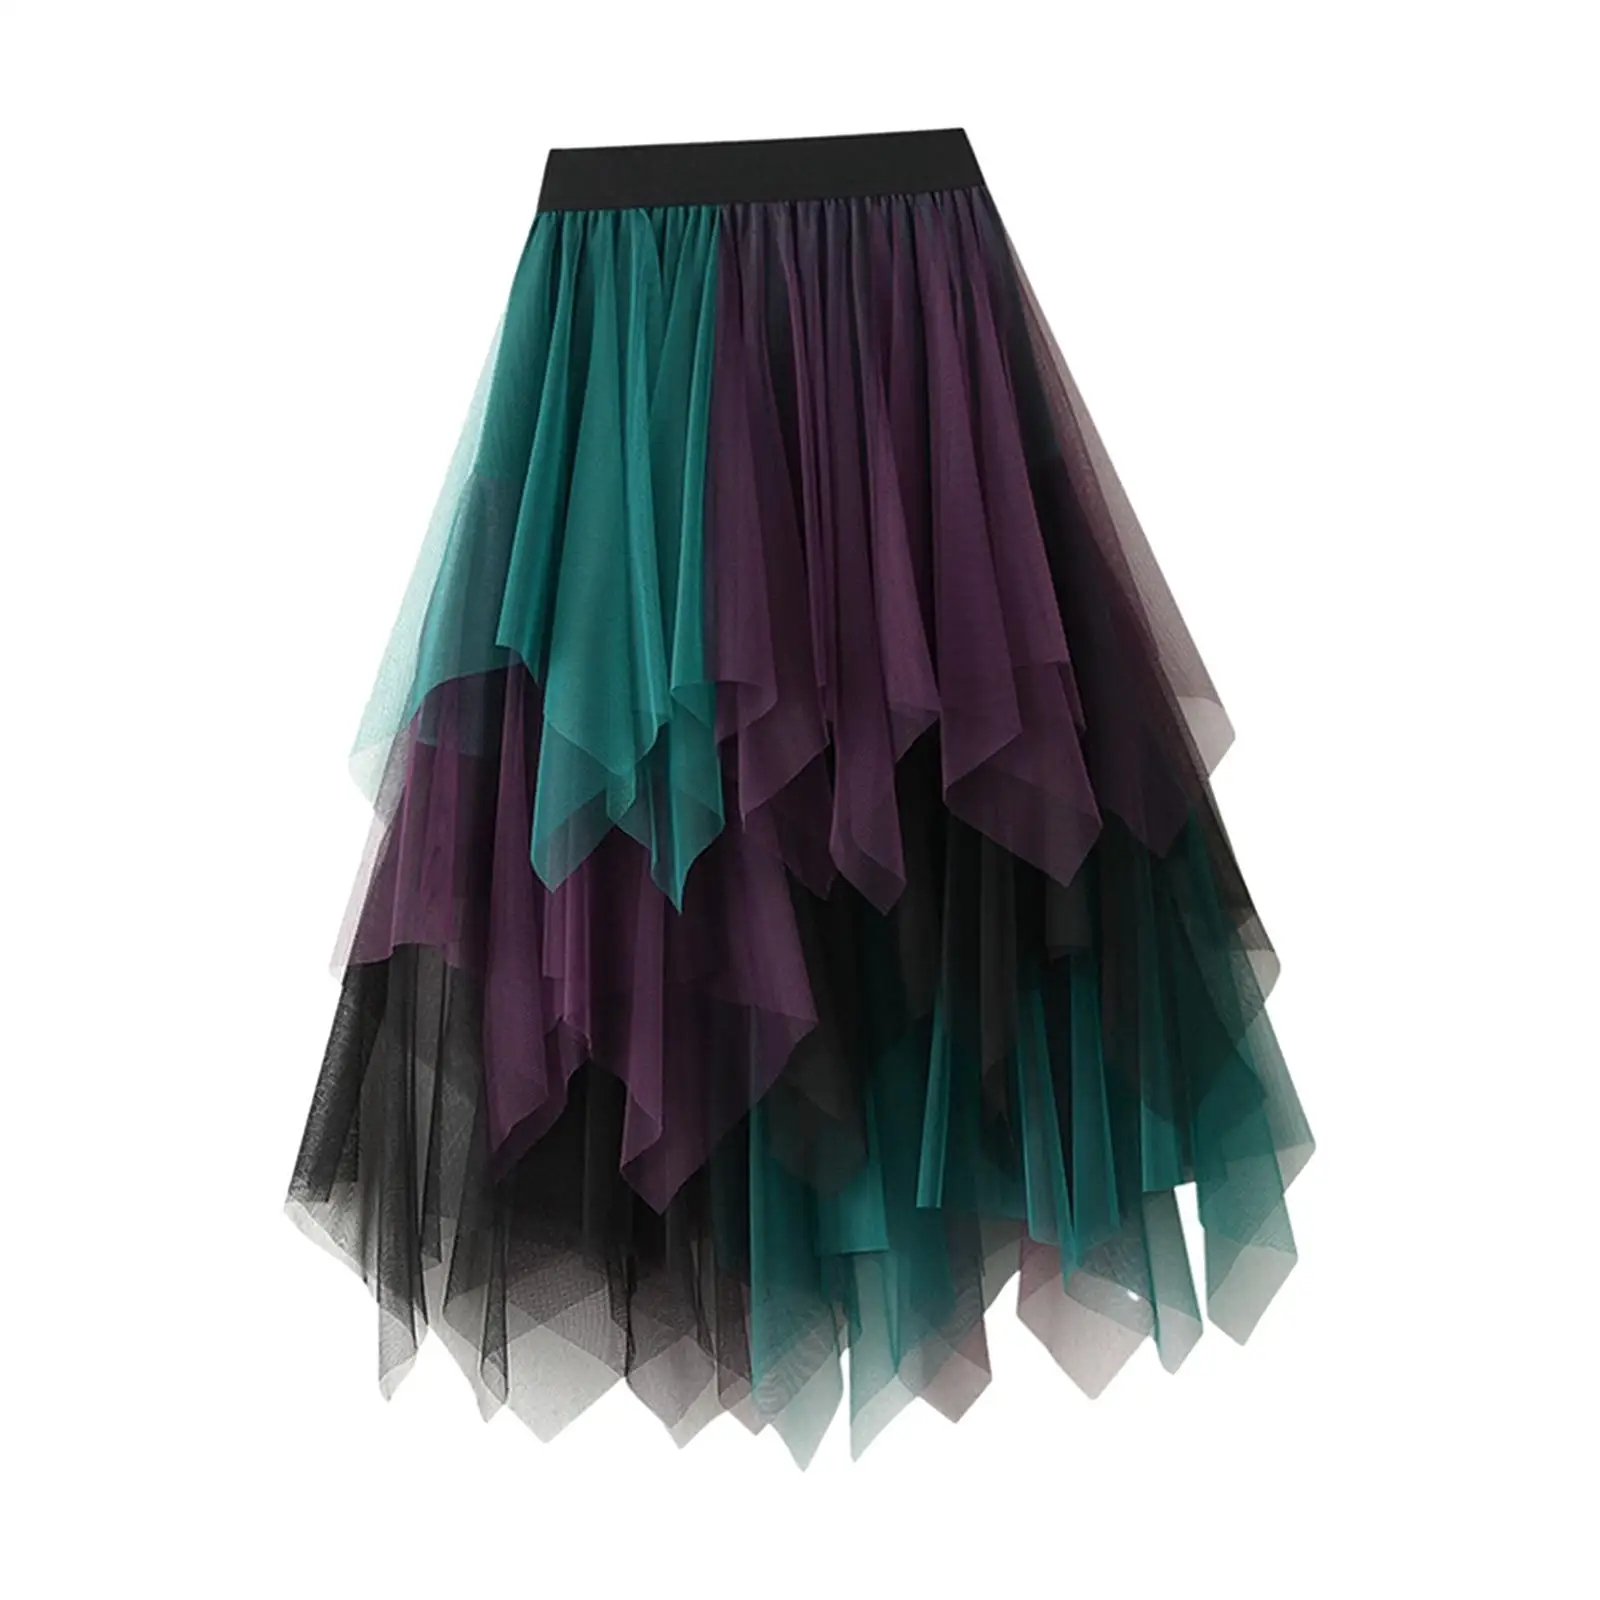 Tulle Skirts for Women Mesh Layered MIDI Long Summer Dress Fashion Tutu Skirt for Formal Halloween Evening Party Prom Dress up